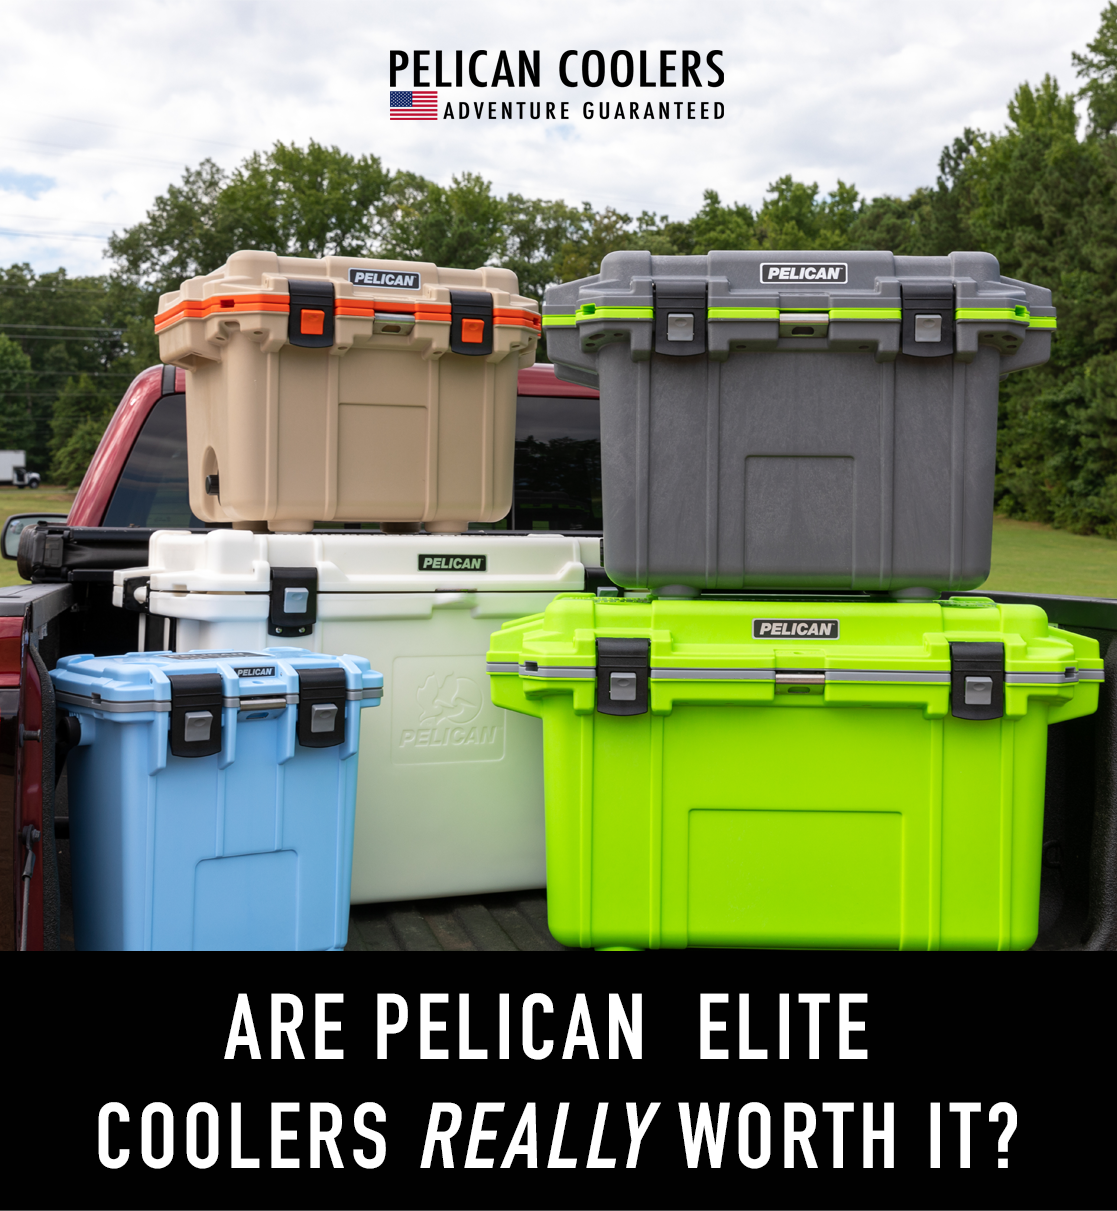 Are Pelican Elite Coolers Really Worth It?